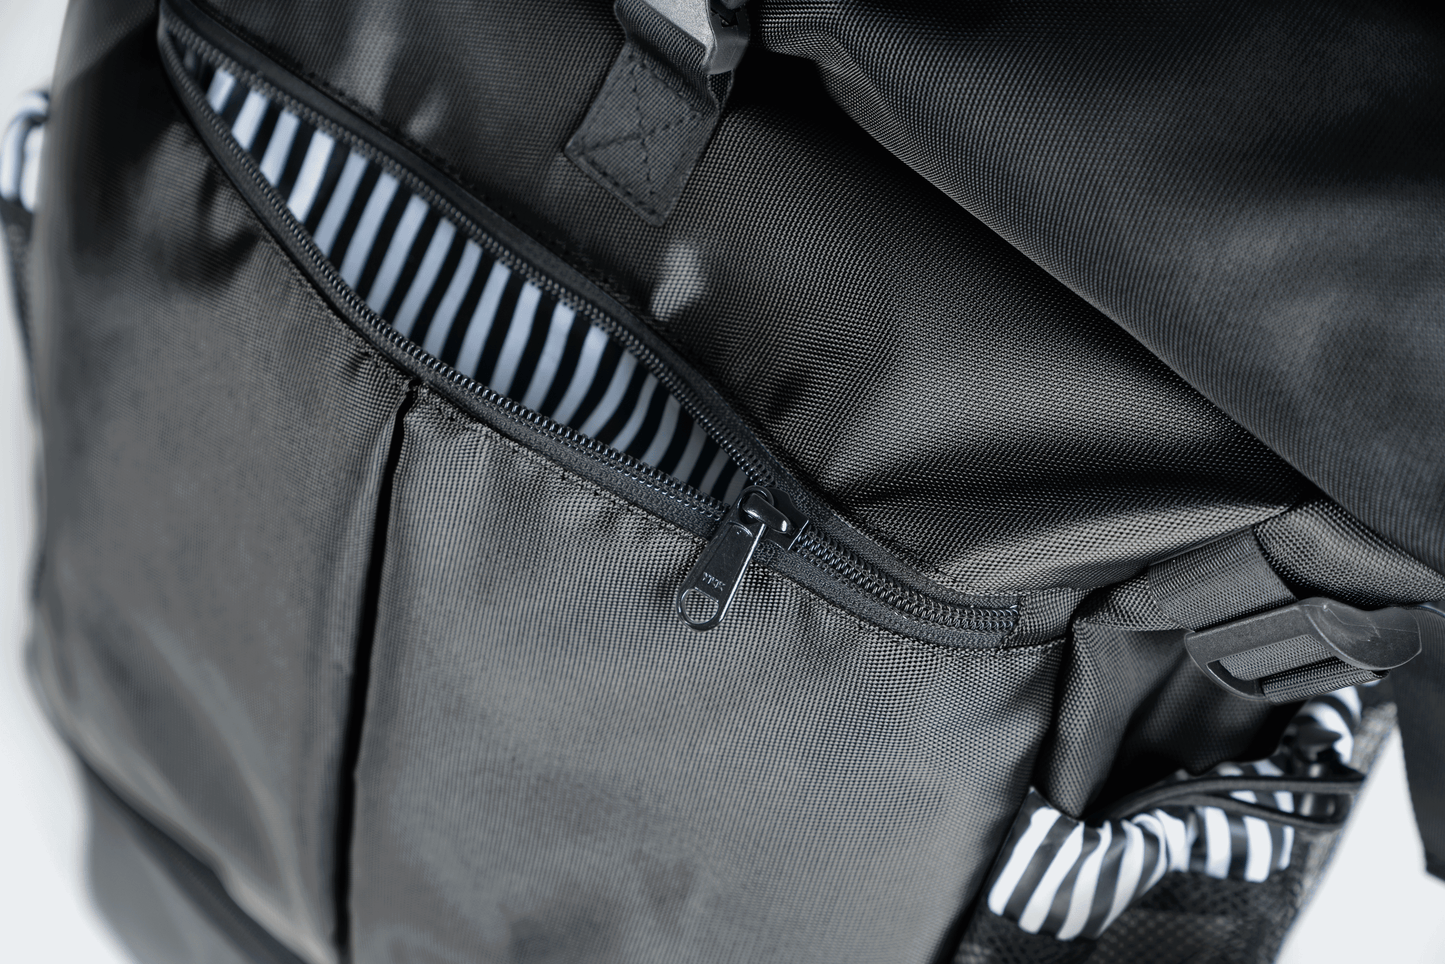 Roo betty Nyx back ack uses YKK zips for quality and longevity 